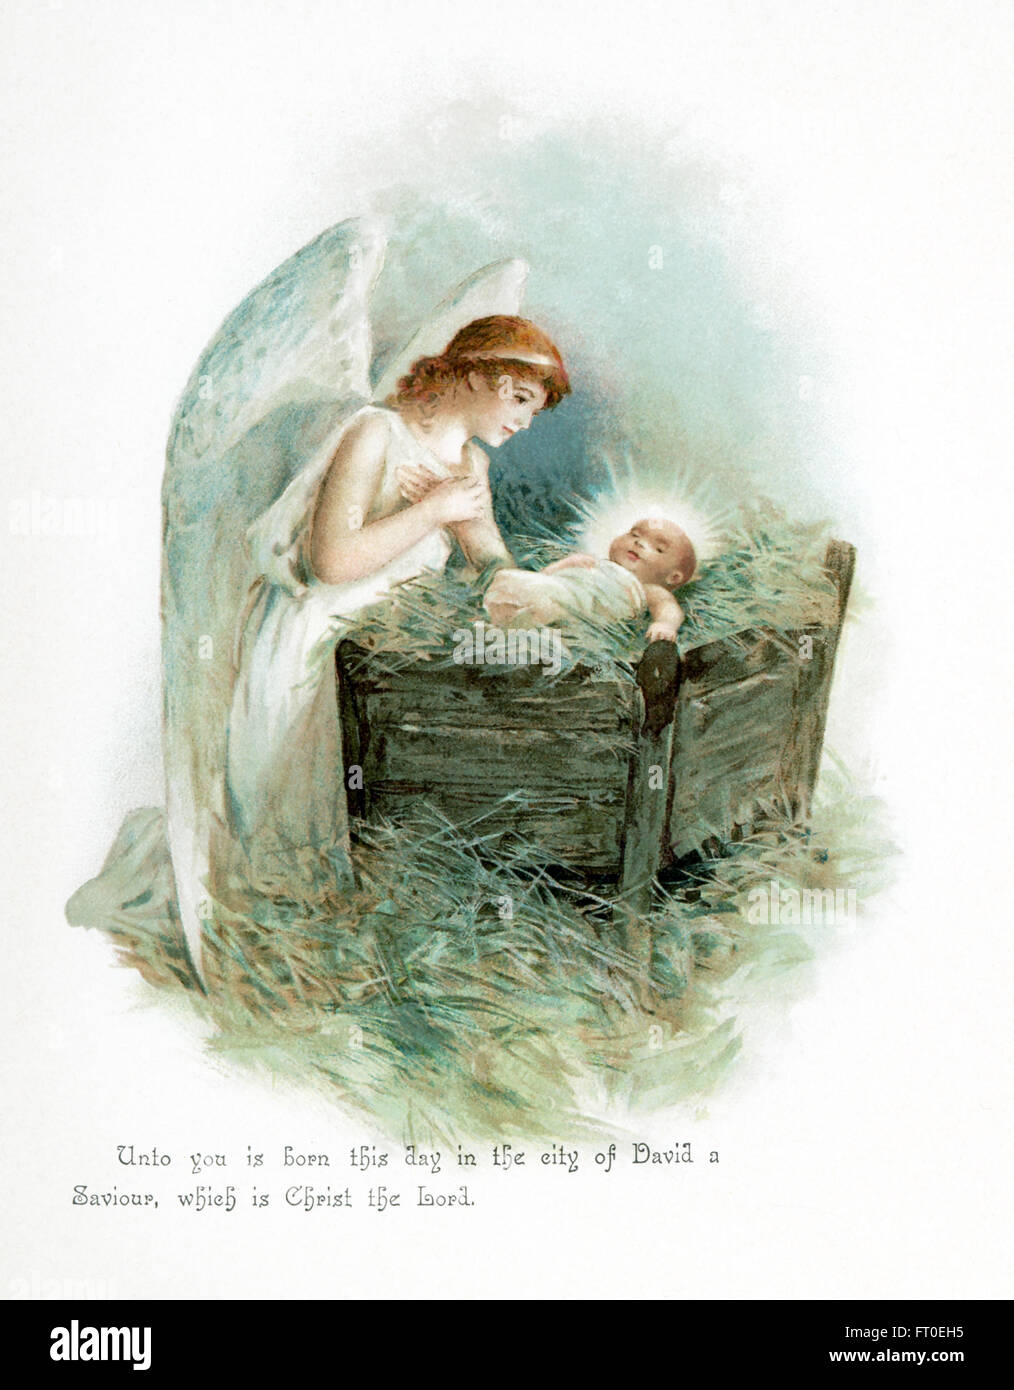 The caption for this illustration reads:Unto you is born this day in the city of David a Savior, which is Christ the Lord. The Christian religion celebrates the birth of Jesus Christ, the central figure of the religion, on December 25. The birth is often referred to as 'the Nativity' and the three main figures are Jesus, his mother Mary, and Mary's husband Joseph. In this 19th century depiction, an angel is shown with the infant Jesus, who is lying in a manger. Stock Photo